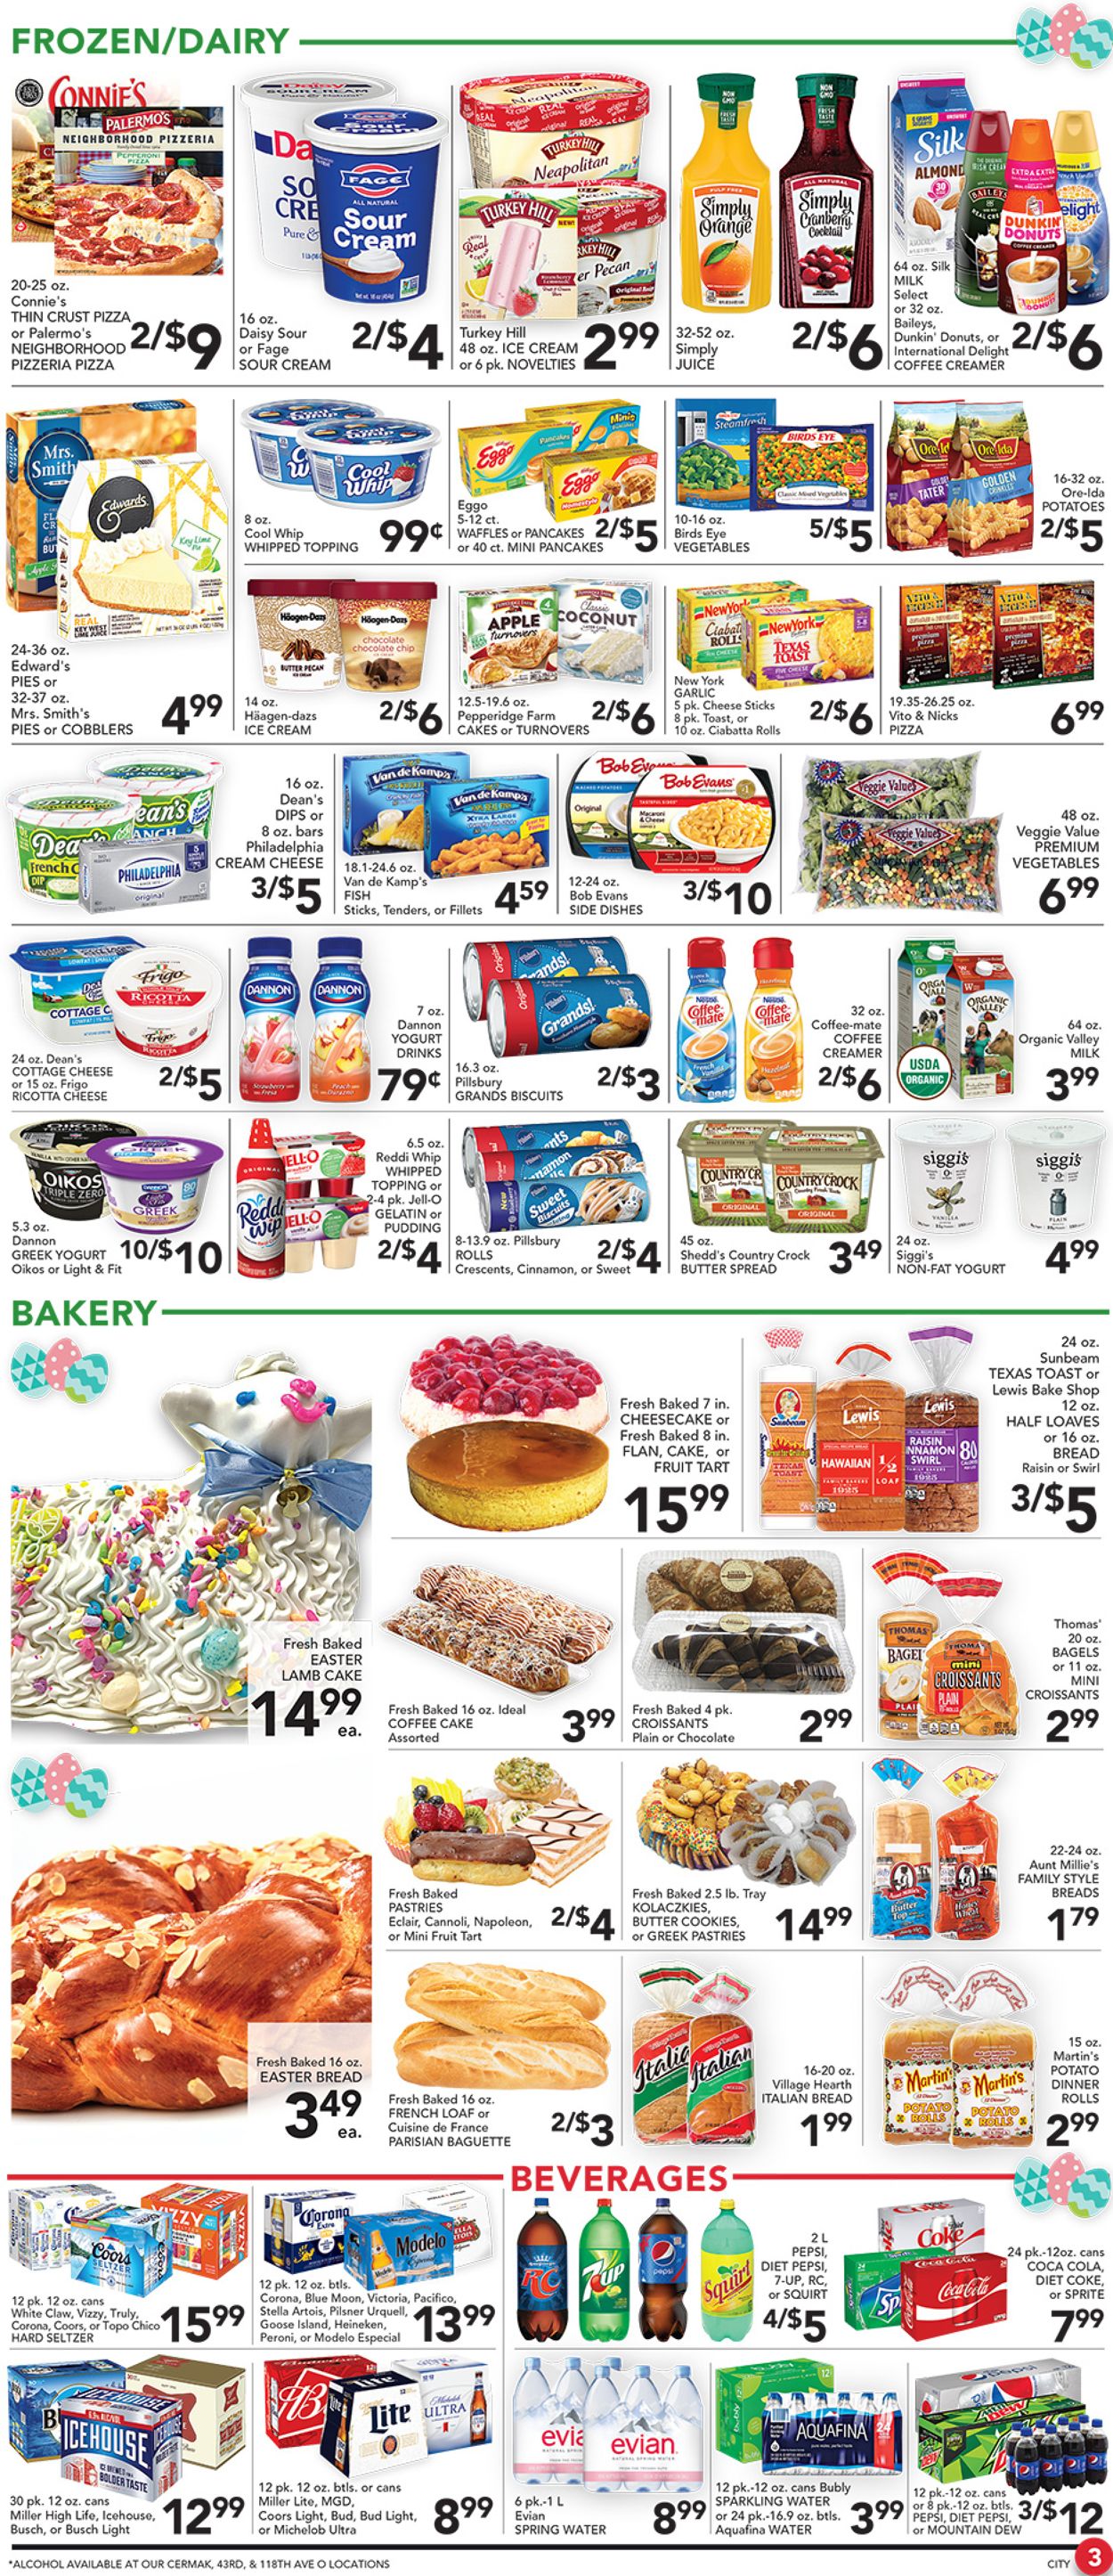 Pete's Fresh Market Easter 2021 ad Weekly Ad Circular - valid 03/31-04/06/2021 (Page 3)